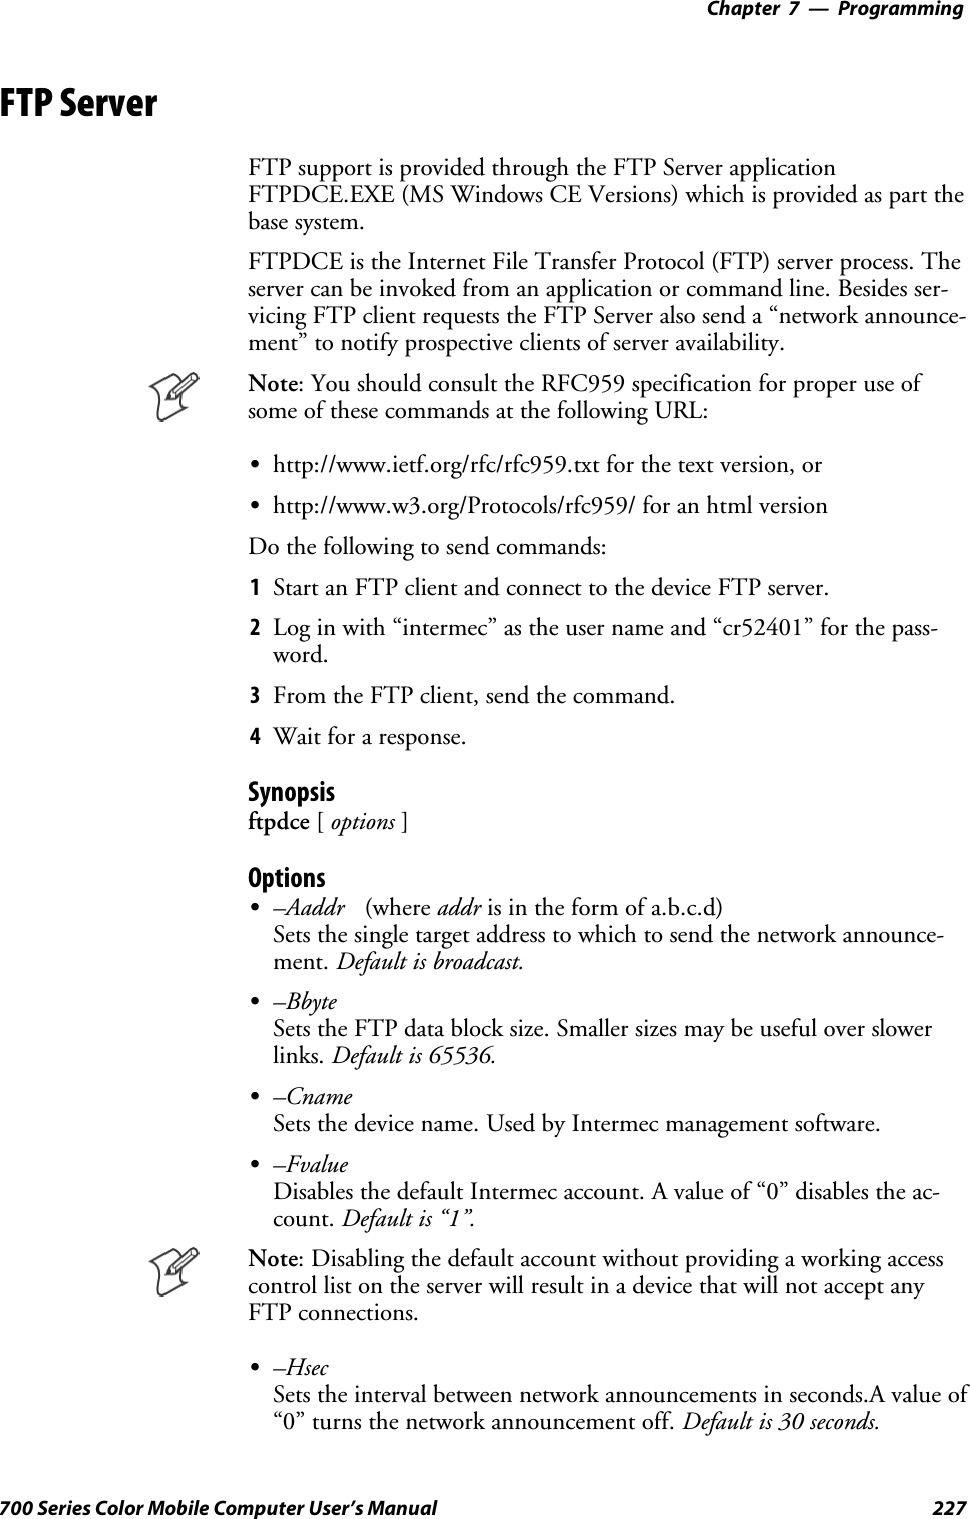 Programming—Chapter 7227700 Series Color Mobile Computer User’s ManualFTP ServerFTP support is provided through the FTP Server applicationFTPDCE.EXE (MS Windows CE Versions) which is provided as part thebase system.FTPDCE is the Internet File Transfer Protocol (FTP) server process. Theserver can be invoked from an application or command line. Besides ser-vicing FTP client requests the FTP Server also send a “network announce-ment” to notify prospective clients of server availability.Note: You should consult the RFC959 specification for proper use ofsome of these commands at the following URL:Shttp://www.ietf.org/rfc/rfc959.txt for the text version, orShttp://www.w3.org/Protocols/rfc959/ for an html versionDo the following to send commands:1Start an FTP client and connect to the device FTP server.2Log in with “intermec” as the user name and “cr52401” for the pass-word.3From the FTP client, send the command.4Wait for a response.Synopsisftpdce [options ]OptionsS–Aaddr (where addr is in the form of a.b.c.d)Sets the single target address to which to send the network announce-ment. Default is broadcast.S–BbyteSets the FTP data block size. Smaller sizes may be useful over slowerlinks. Default is 65536.S–CnameSets the device name. Used by Intermec management software.S–FvalueDisables the default Intermec account. A value of “0” disables the ac-count. Default is “1”.Note: Disabling the default account without providing a working accesscontrollistontheserverwillresultinadevicethatwillnotacceptanyFTP connections.S–HsecSets the interval between network announcements in seconds.A value of“0” turns the network announcement off. Default is 30 seconds.